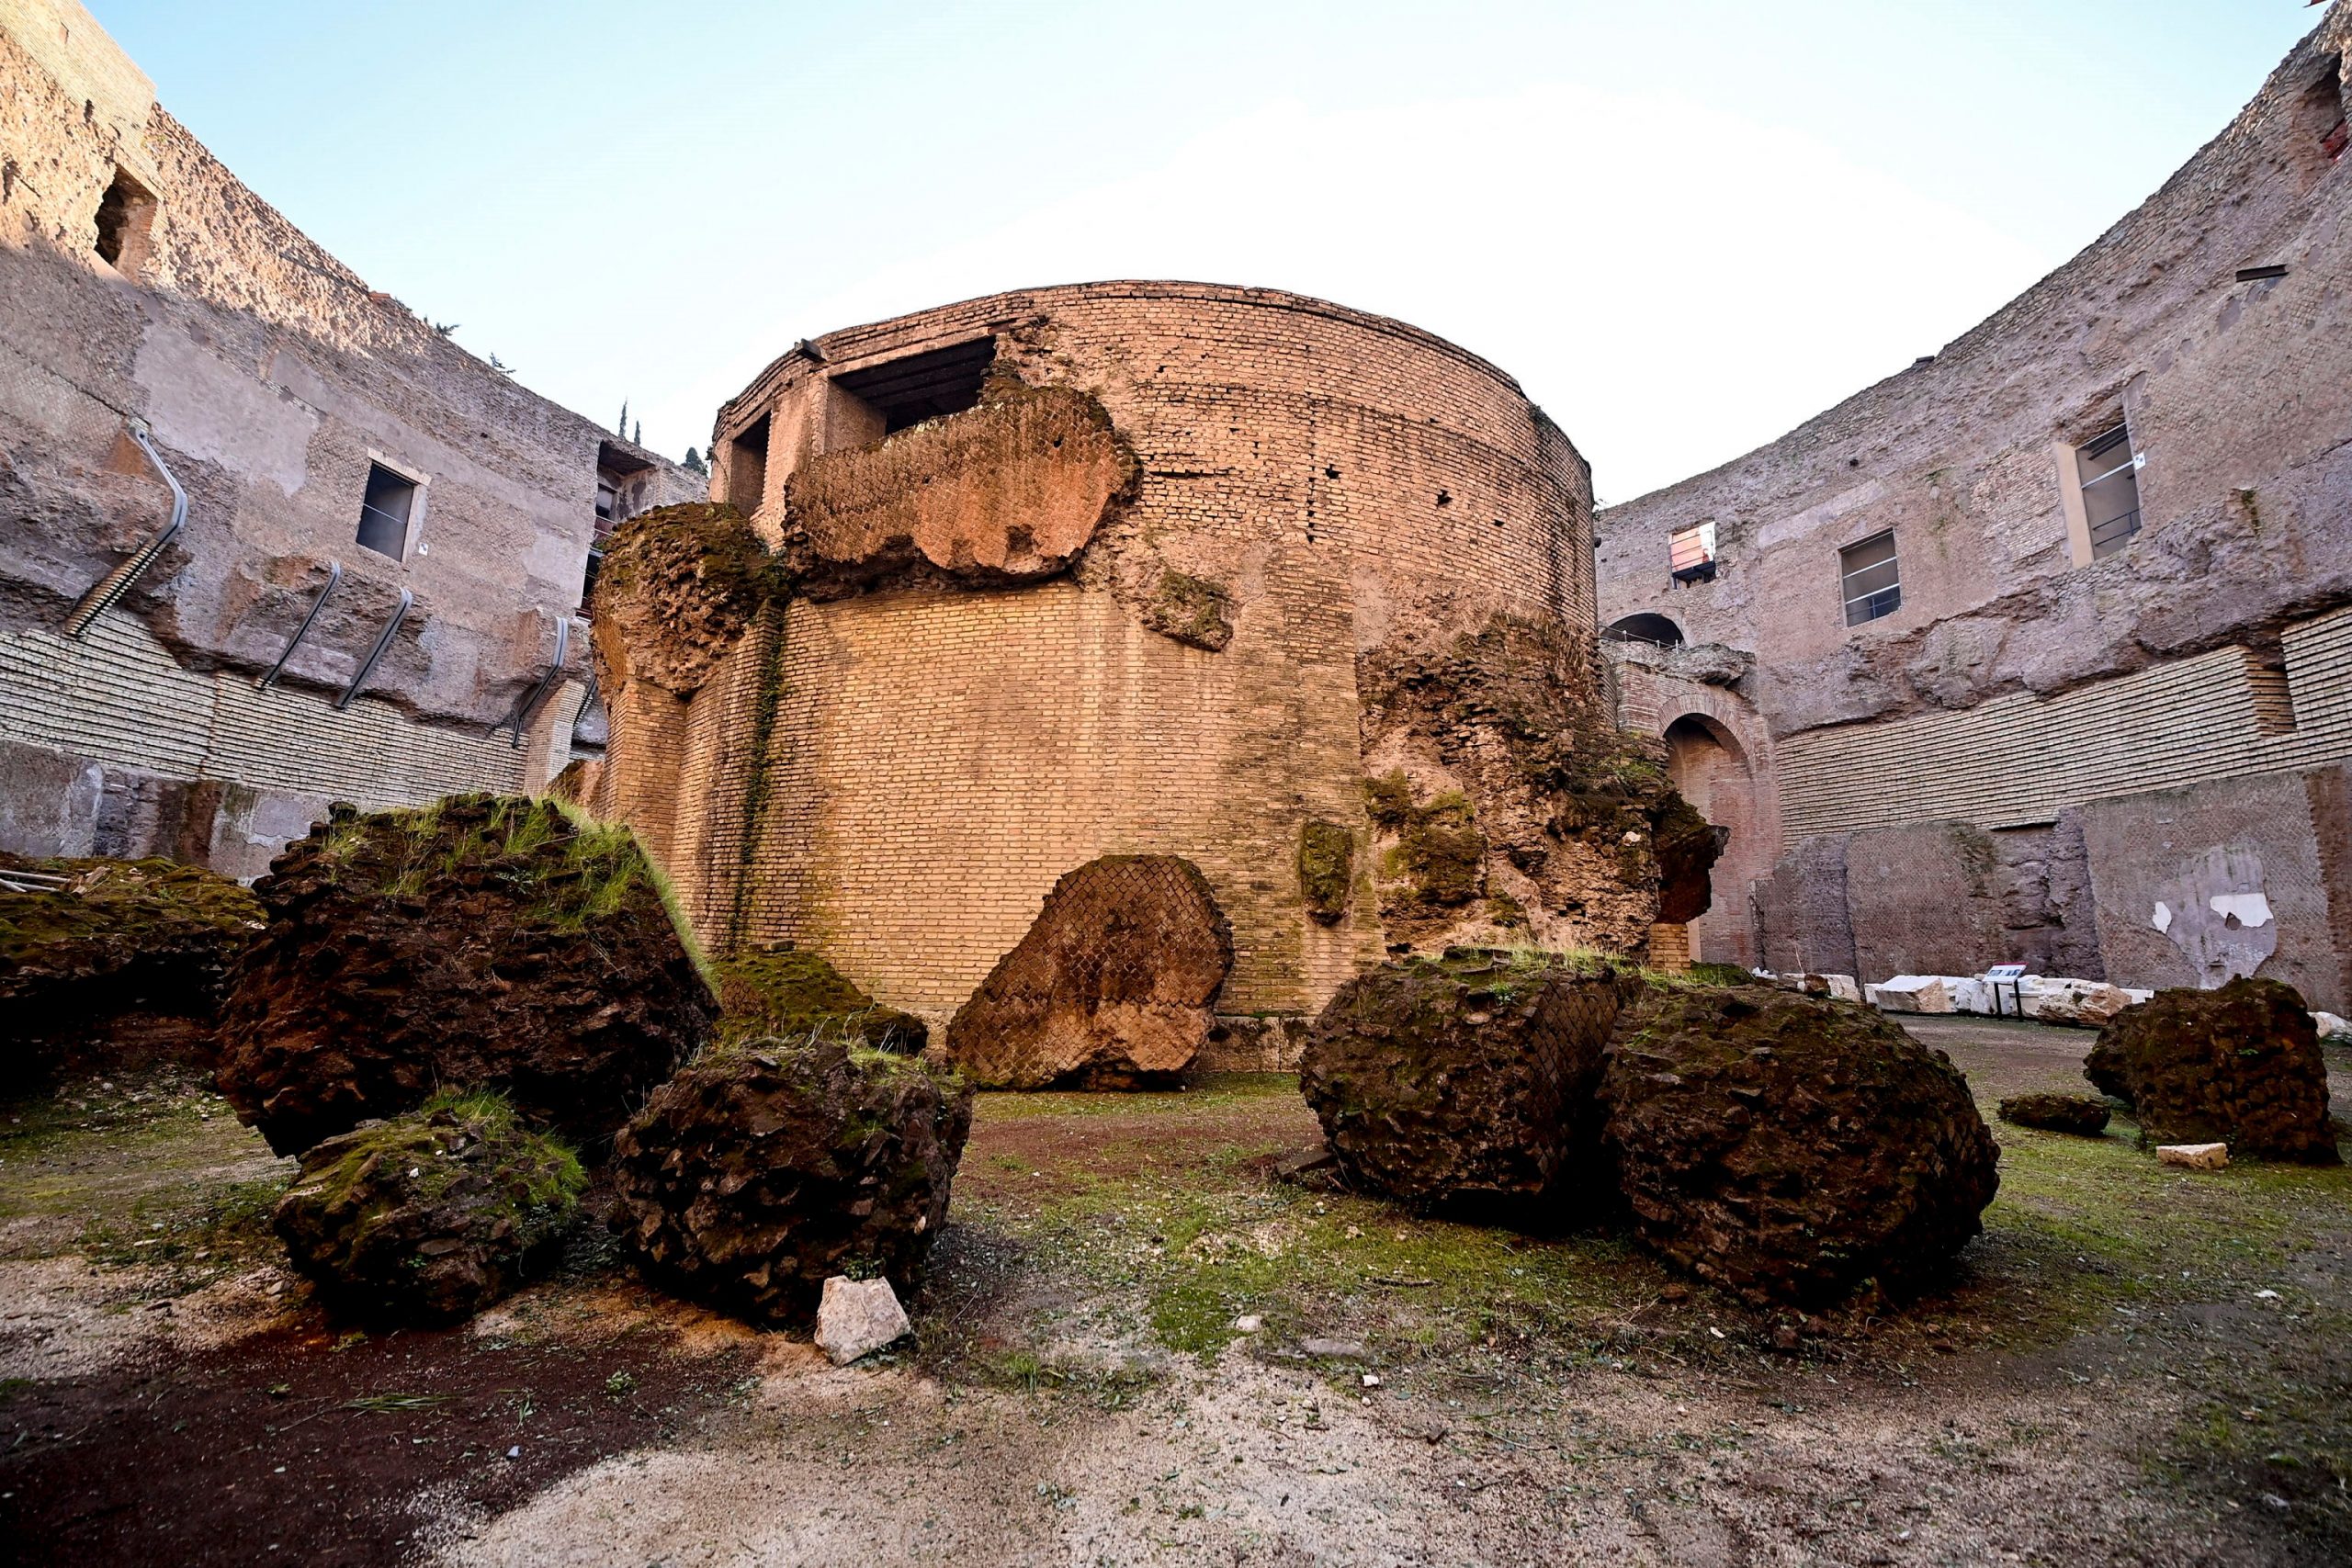 epa08891691 The Mausoleum of Augustus, a very large circular tomb, that will reopen to the public in the spring of 2021 after a conservative restoration project started in 2016, Rome, Italy, 18 December 2020.  EPA/Riccardo Antimiani